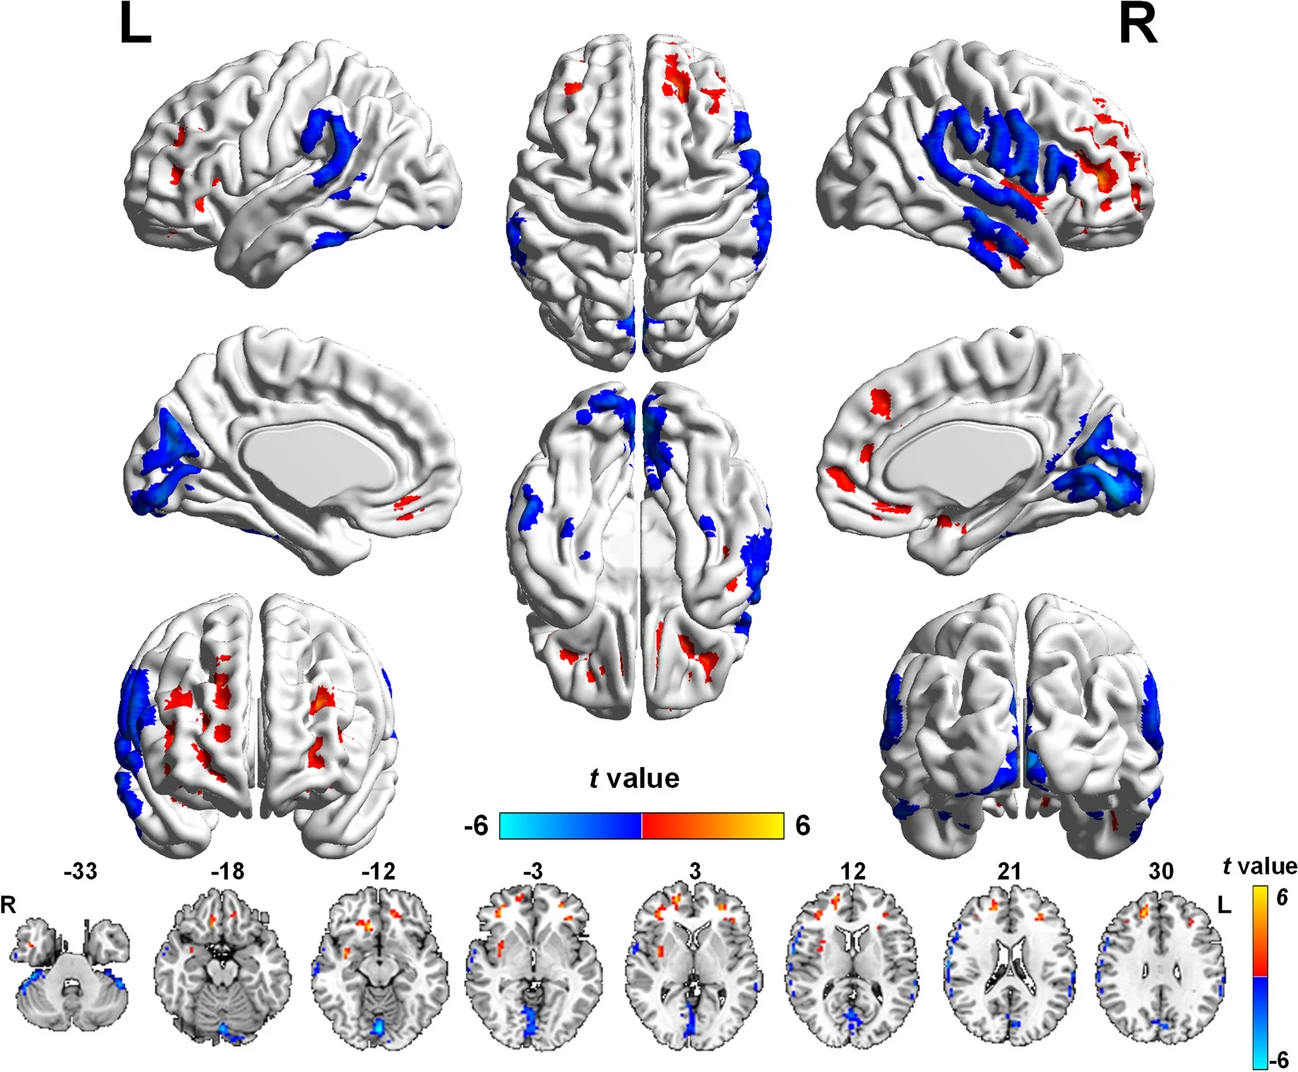 Glaucoma can cause psychological disturbances in patients, including depression and anxiety, even at early stages. These MRIs from the study show brain regions with altered blood flow values in POAG patients. Blue = decreased flow, red = increased flow). Certain regions are also responsible for mood regulation and cognitive ability.